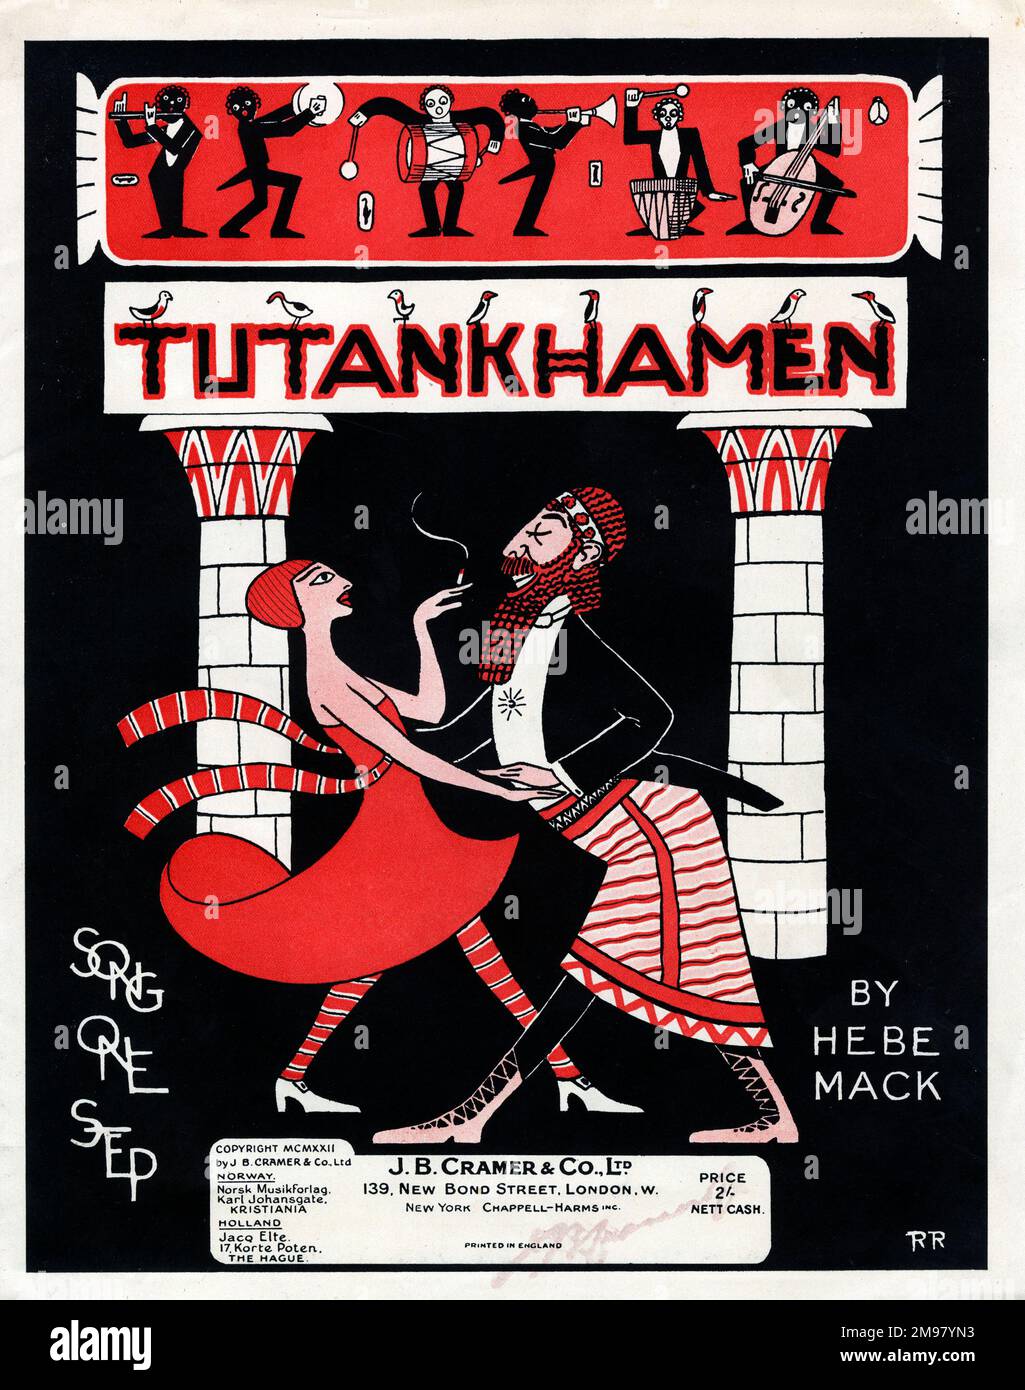 Music cover, Tutankhamen One Step Song, by Hebe Mack. Stock Photo